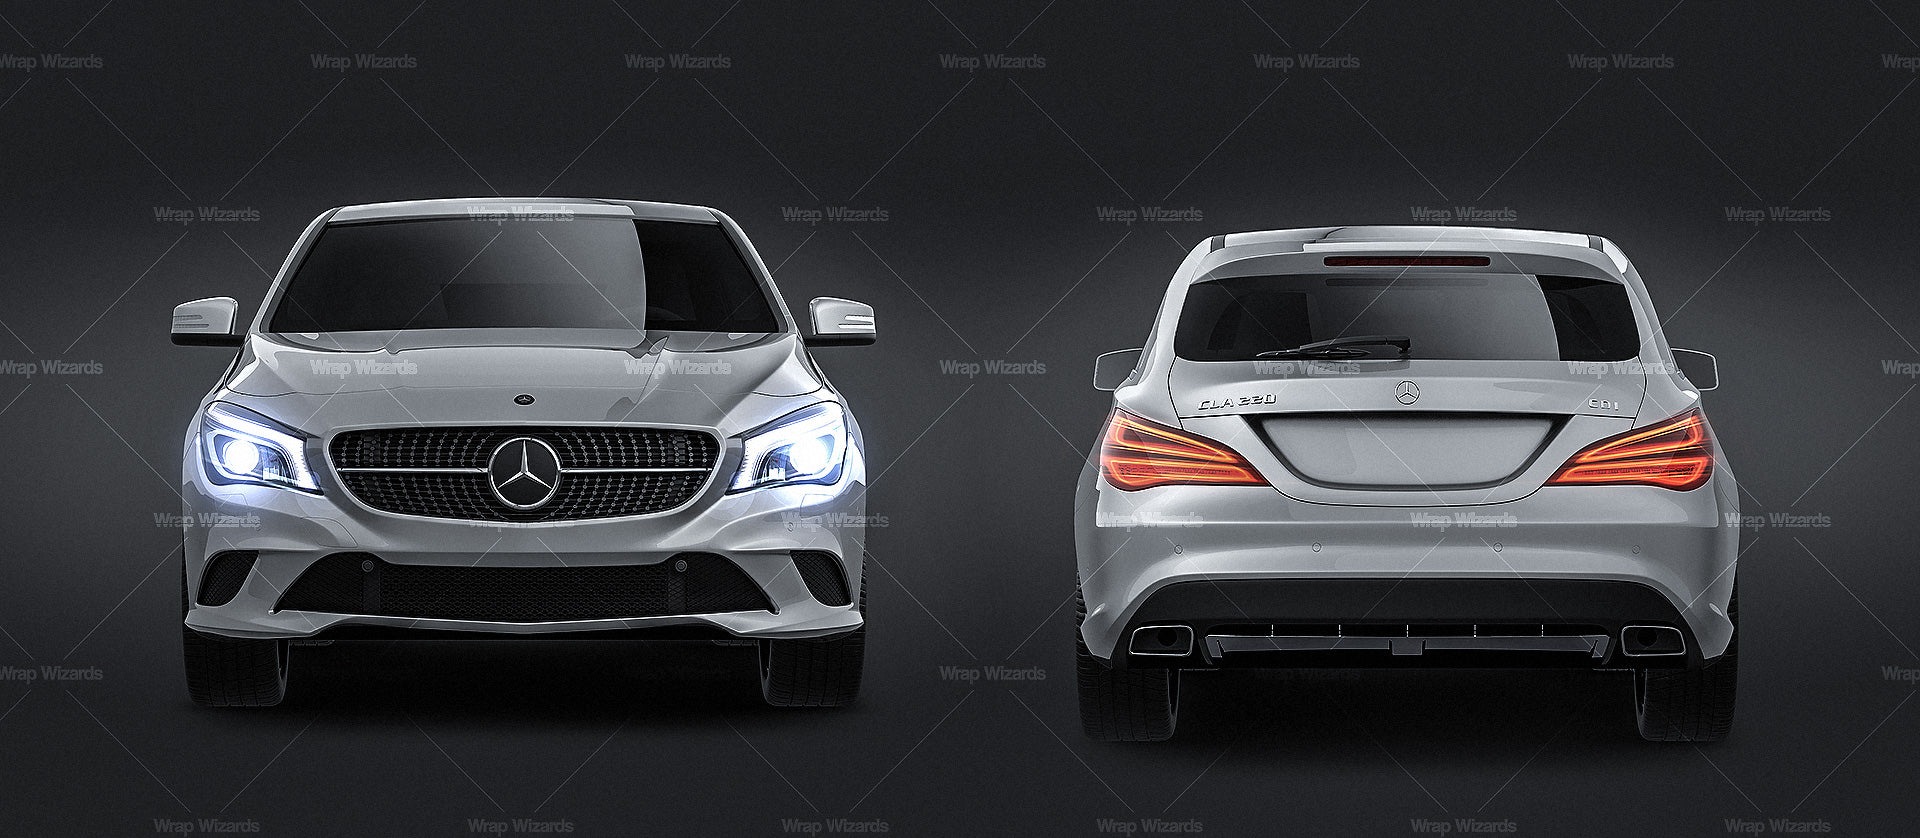 Mercedes-Benz CLA Shooting Brake 2016 glossy finish - all sides Car Mockup Template.psd